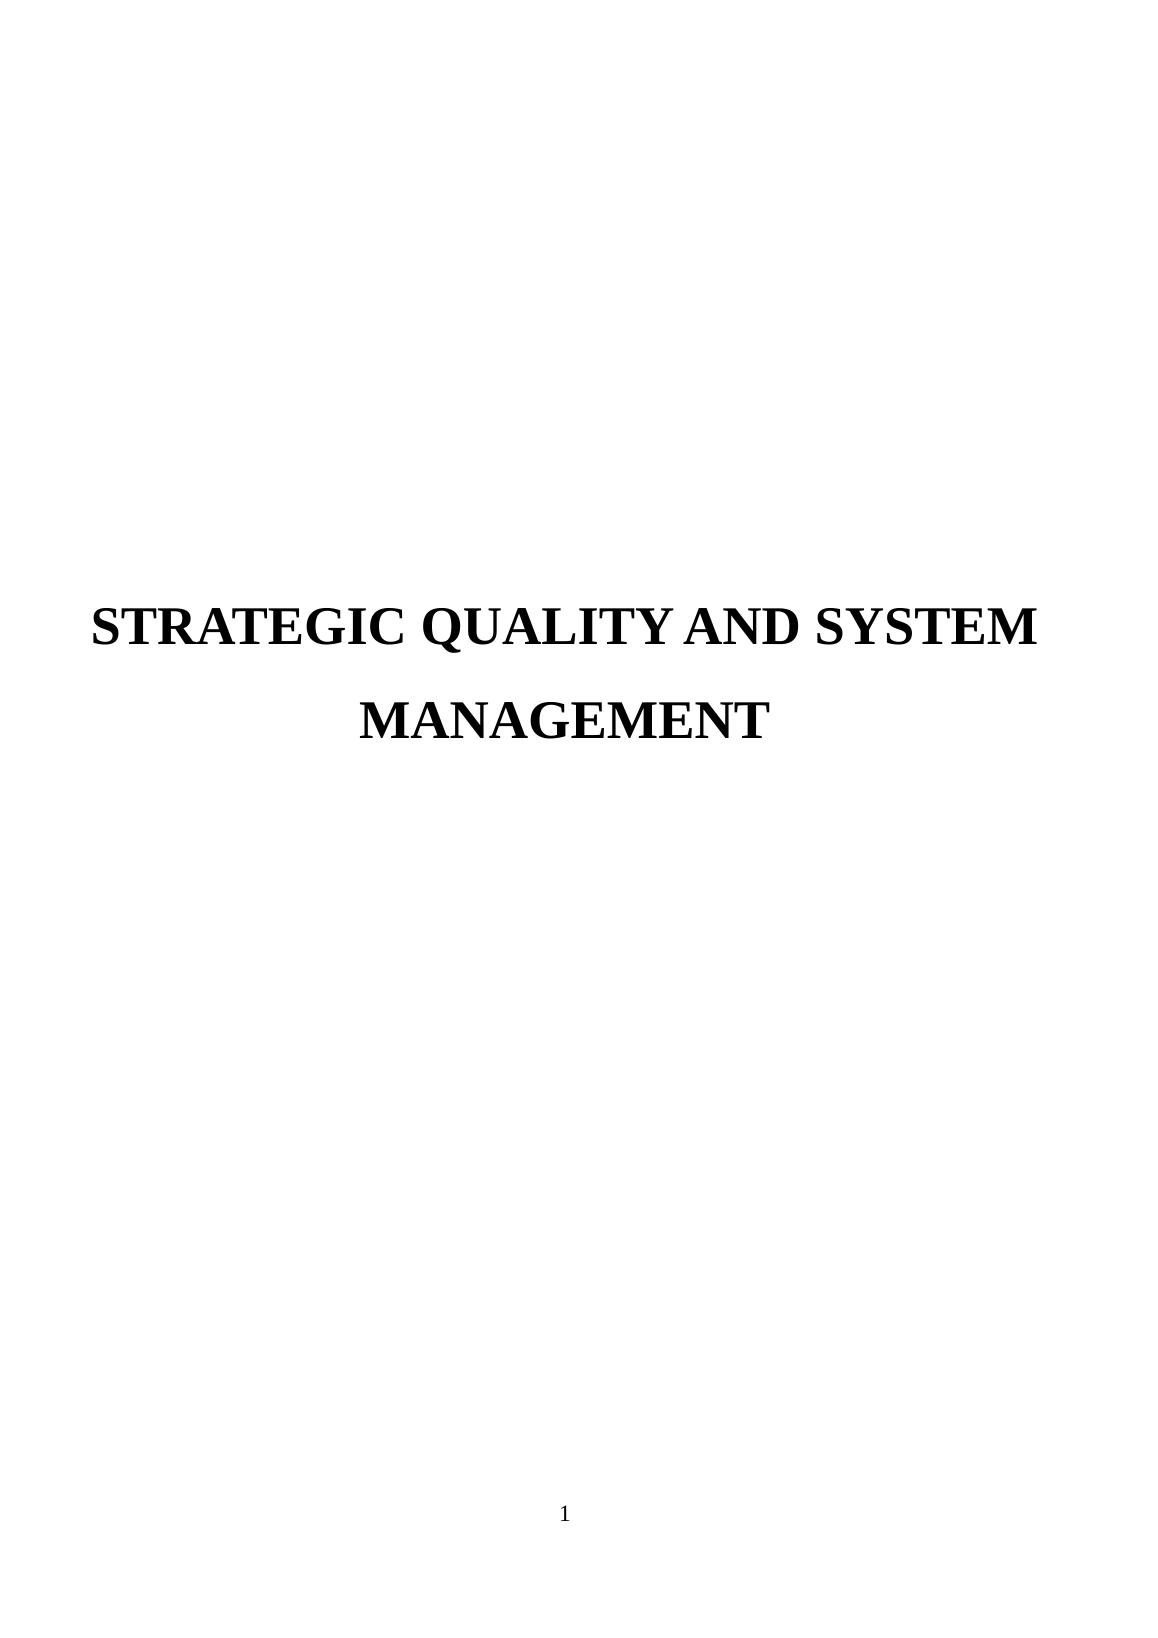 Concept of Strategic Quality Management in Toyota Motor : Case Study_1